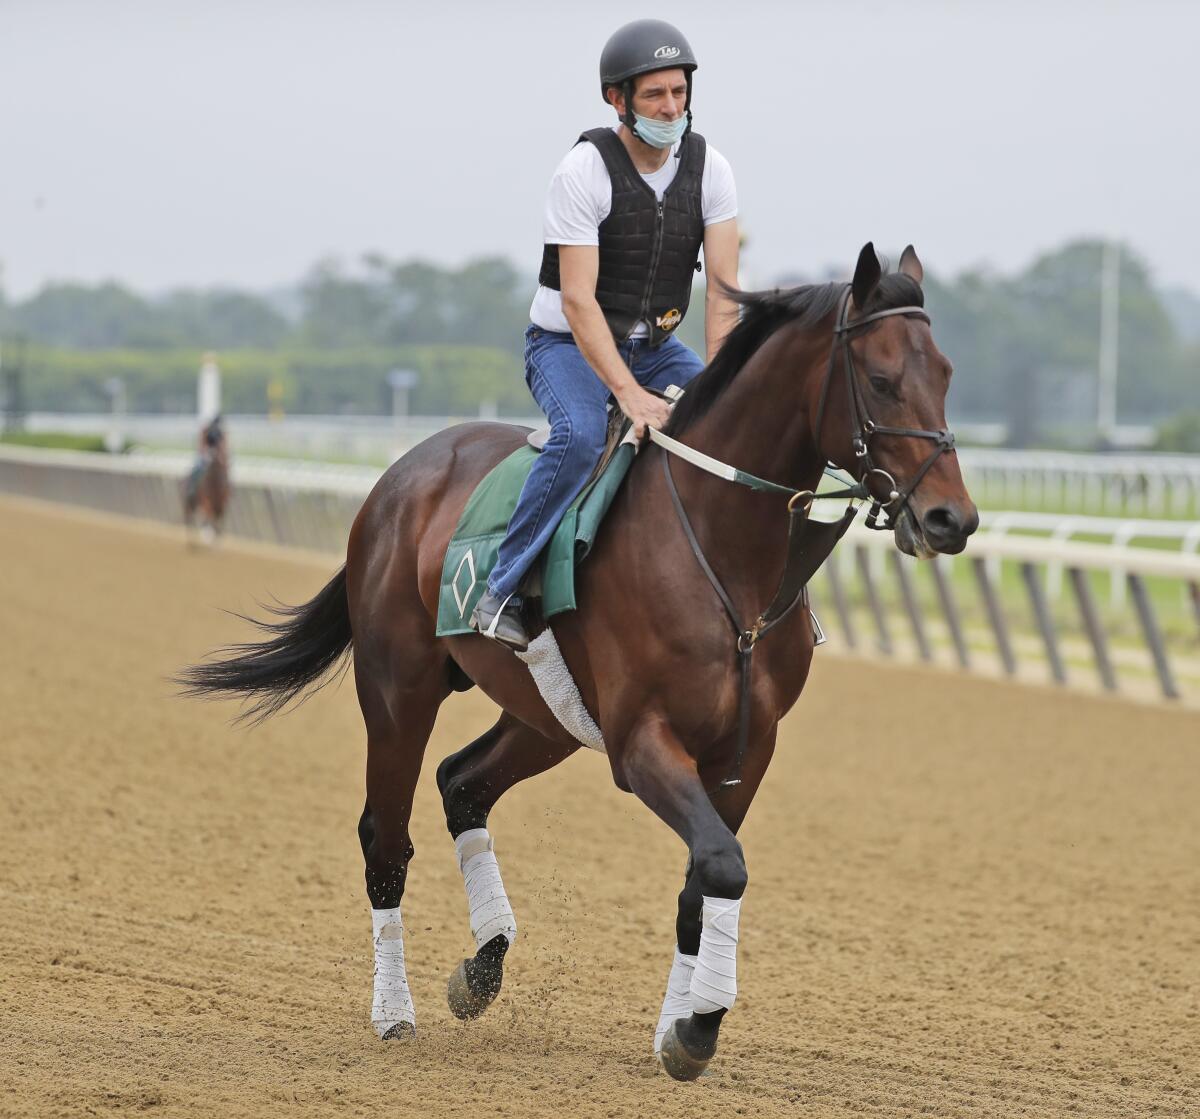 Modernist works out on a track at Belmont Park in Elmont, N.Y., on Thursday.